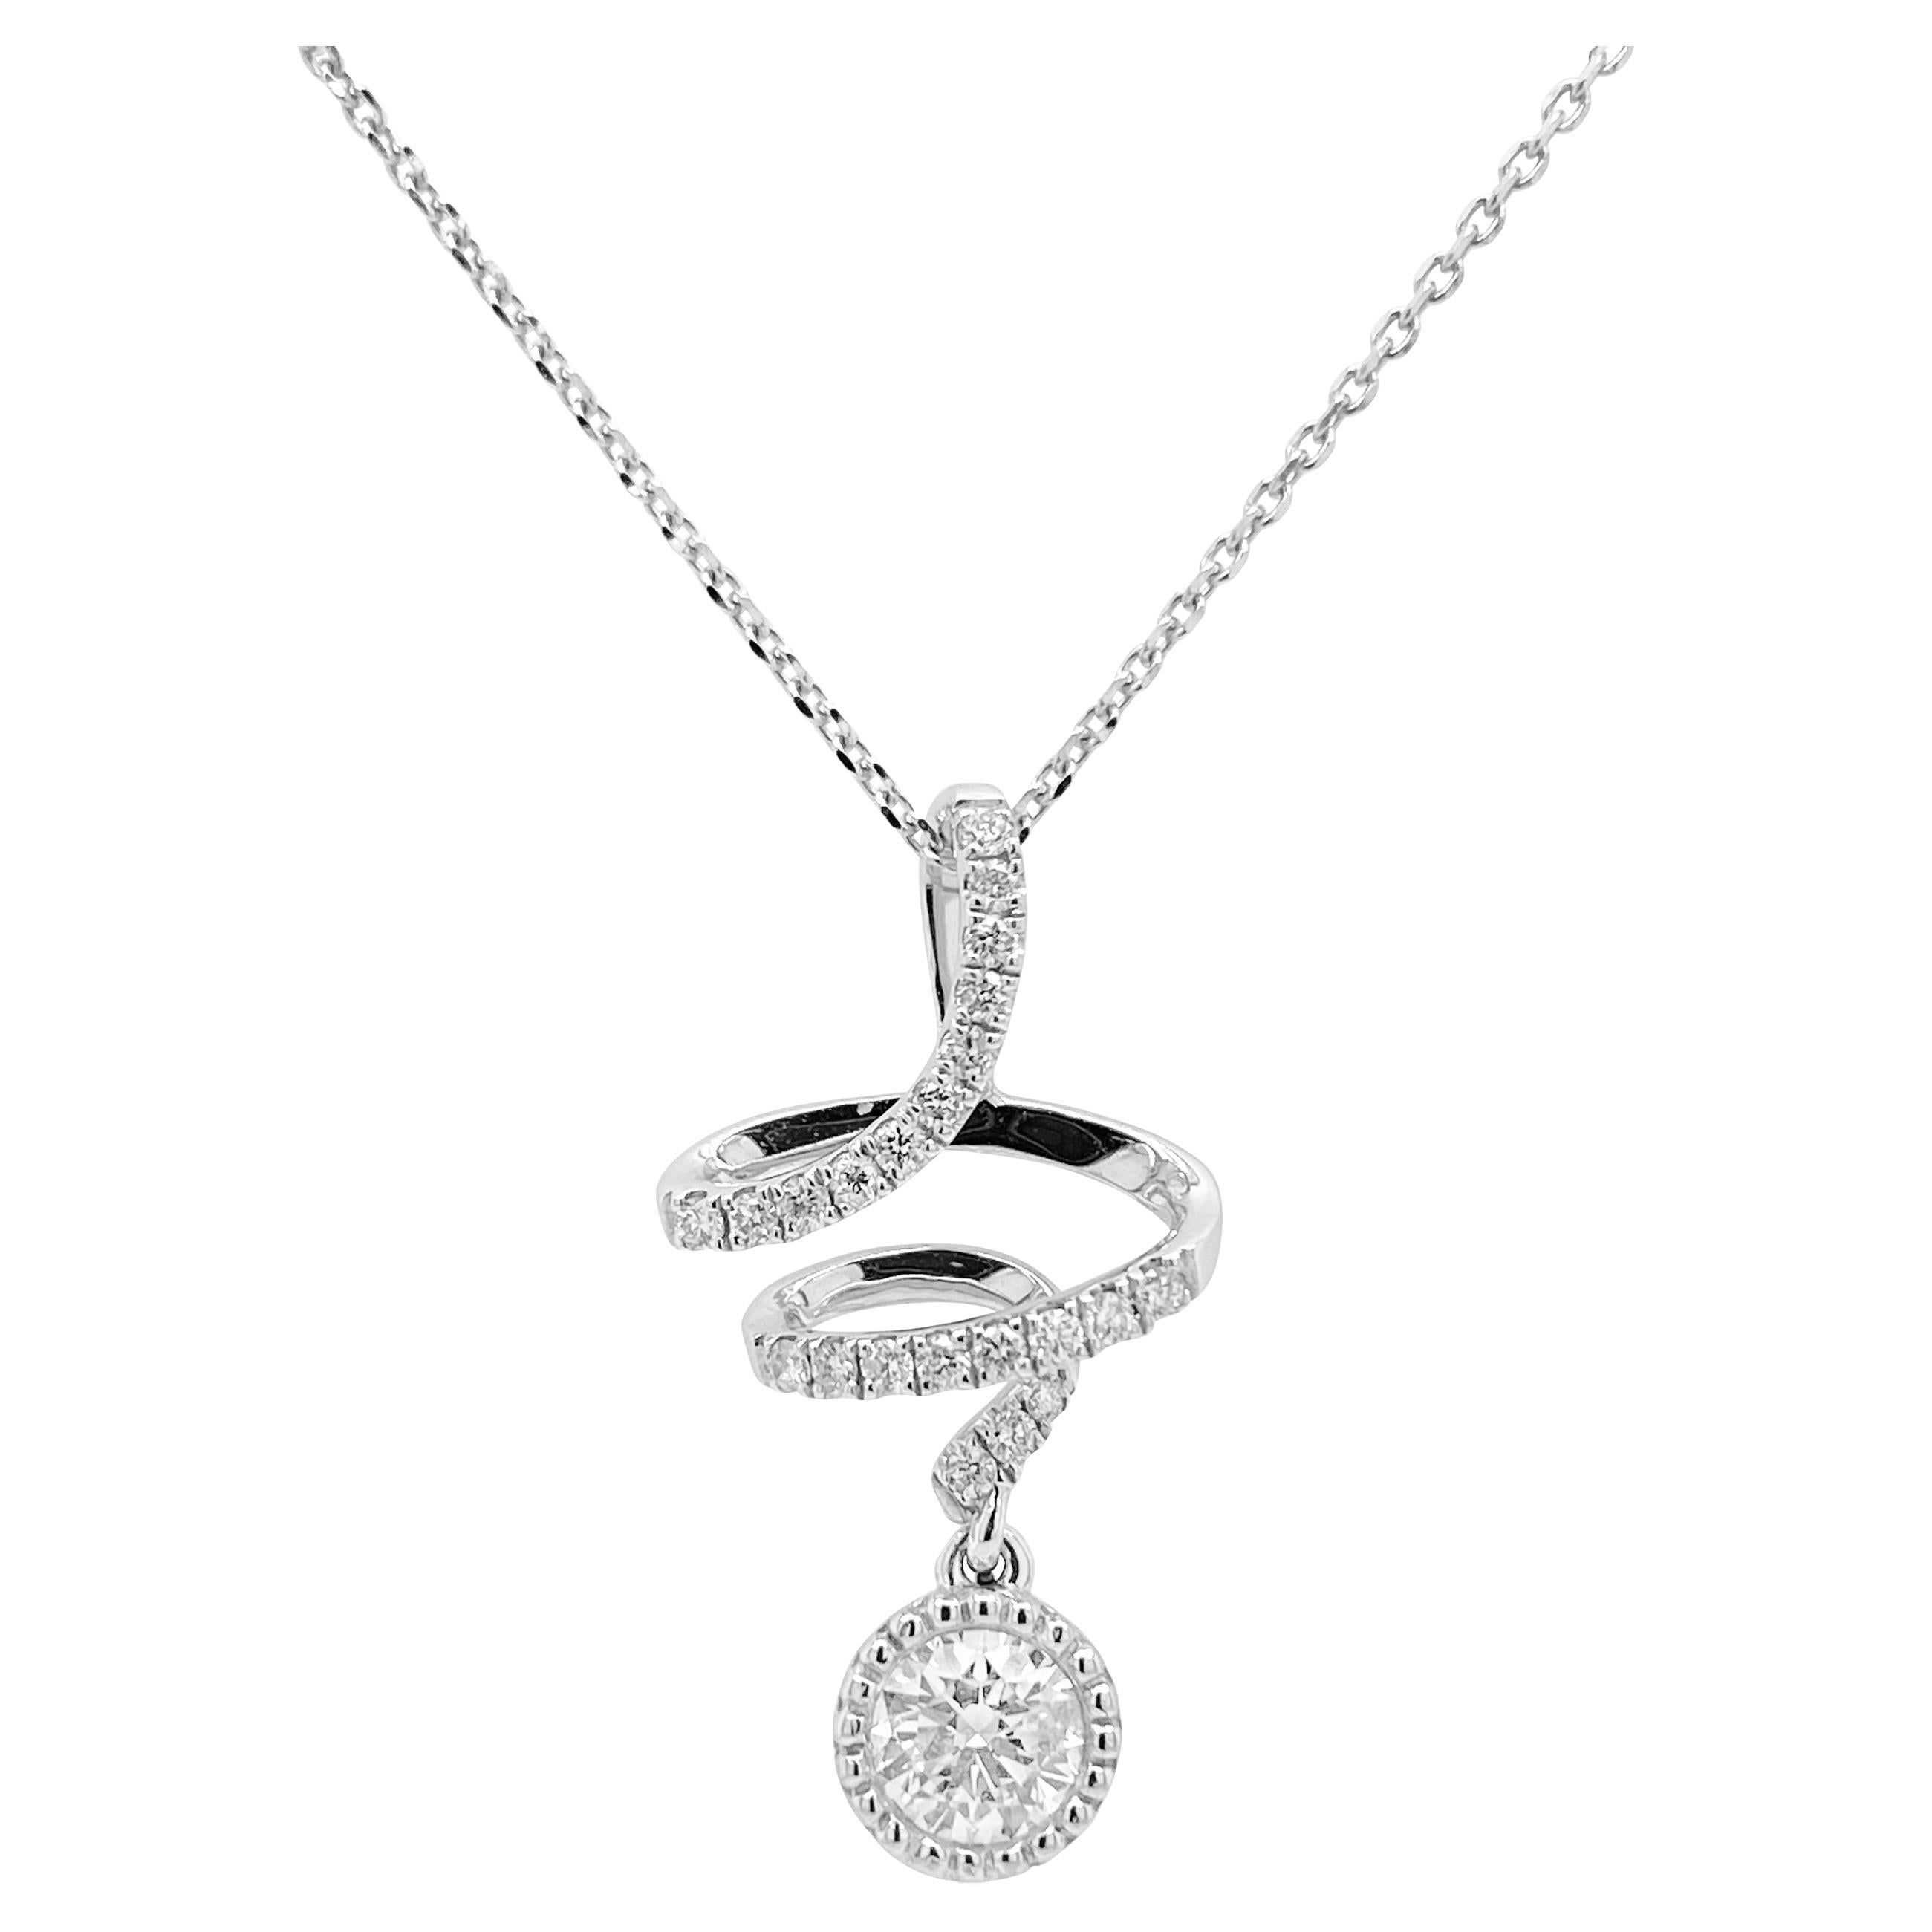 White diamond Pendant made in White Gold with Platinum Chain For Sale